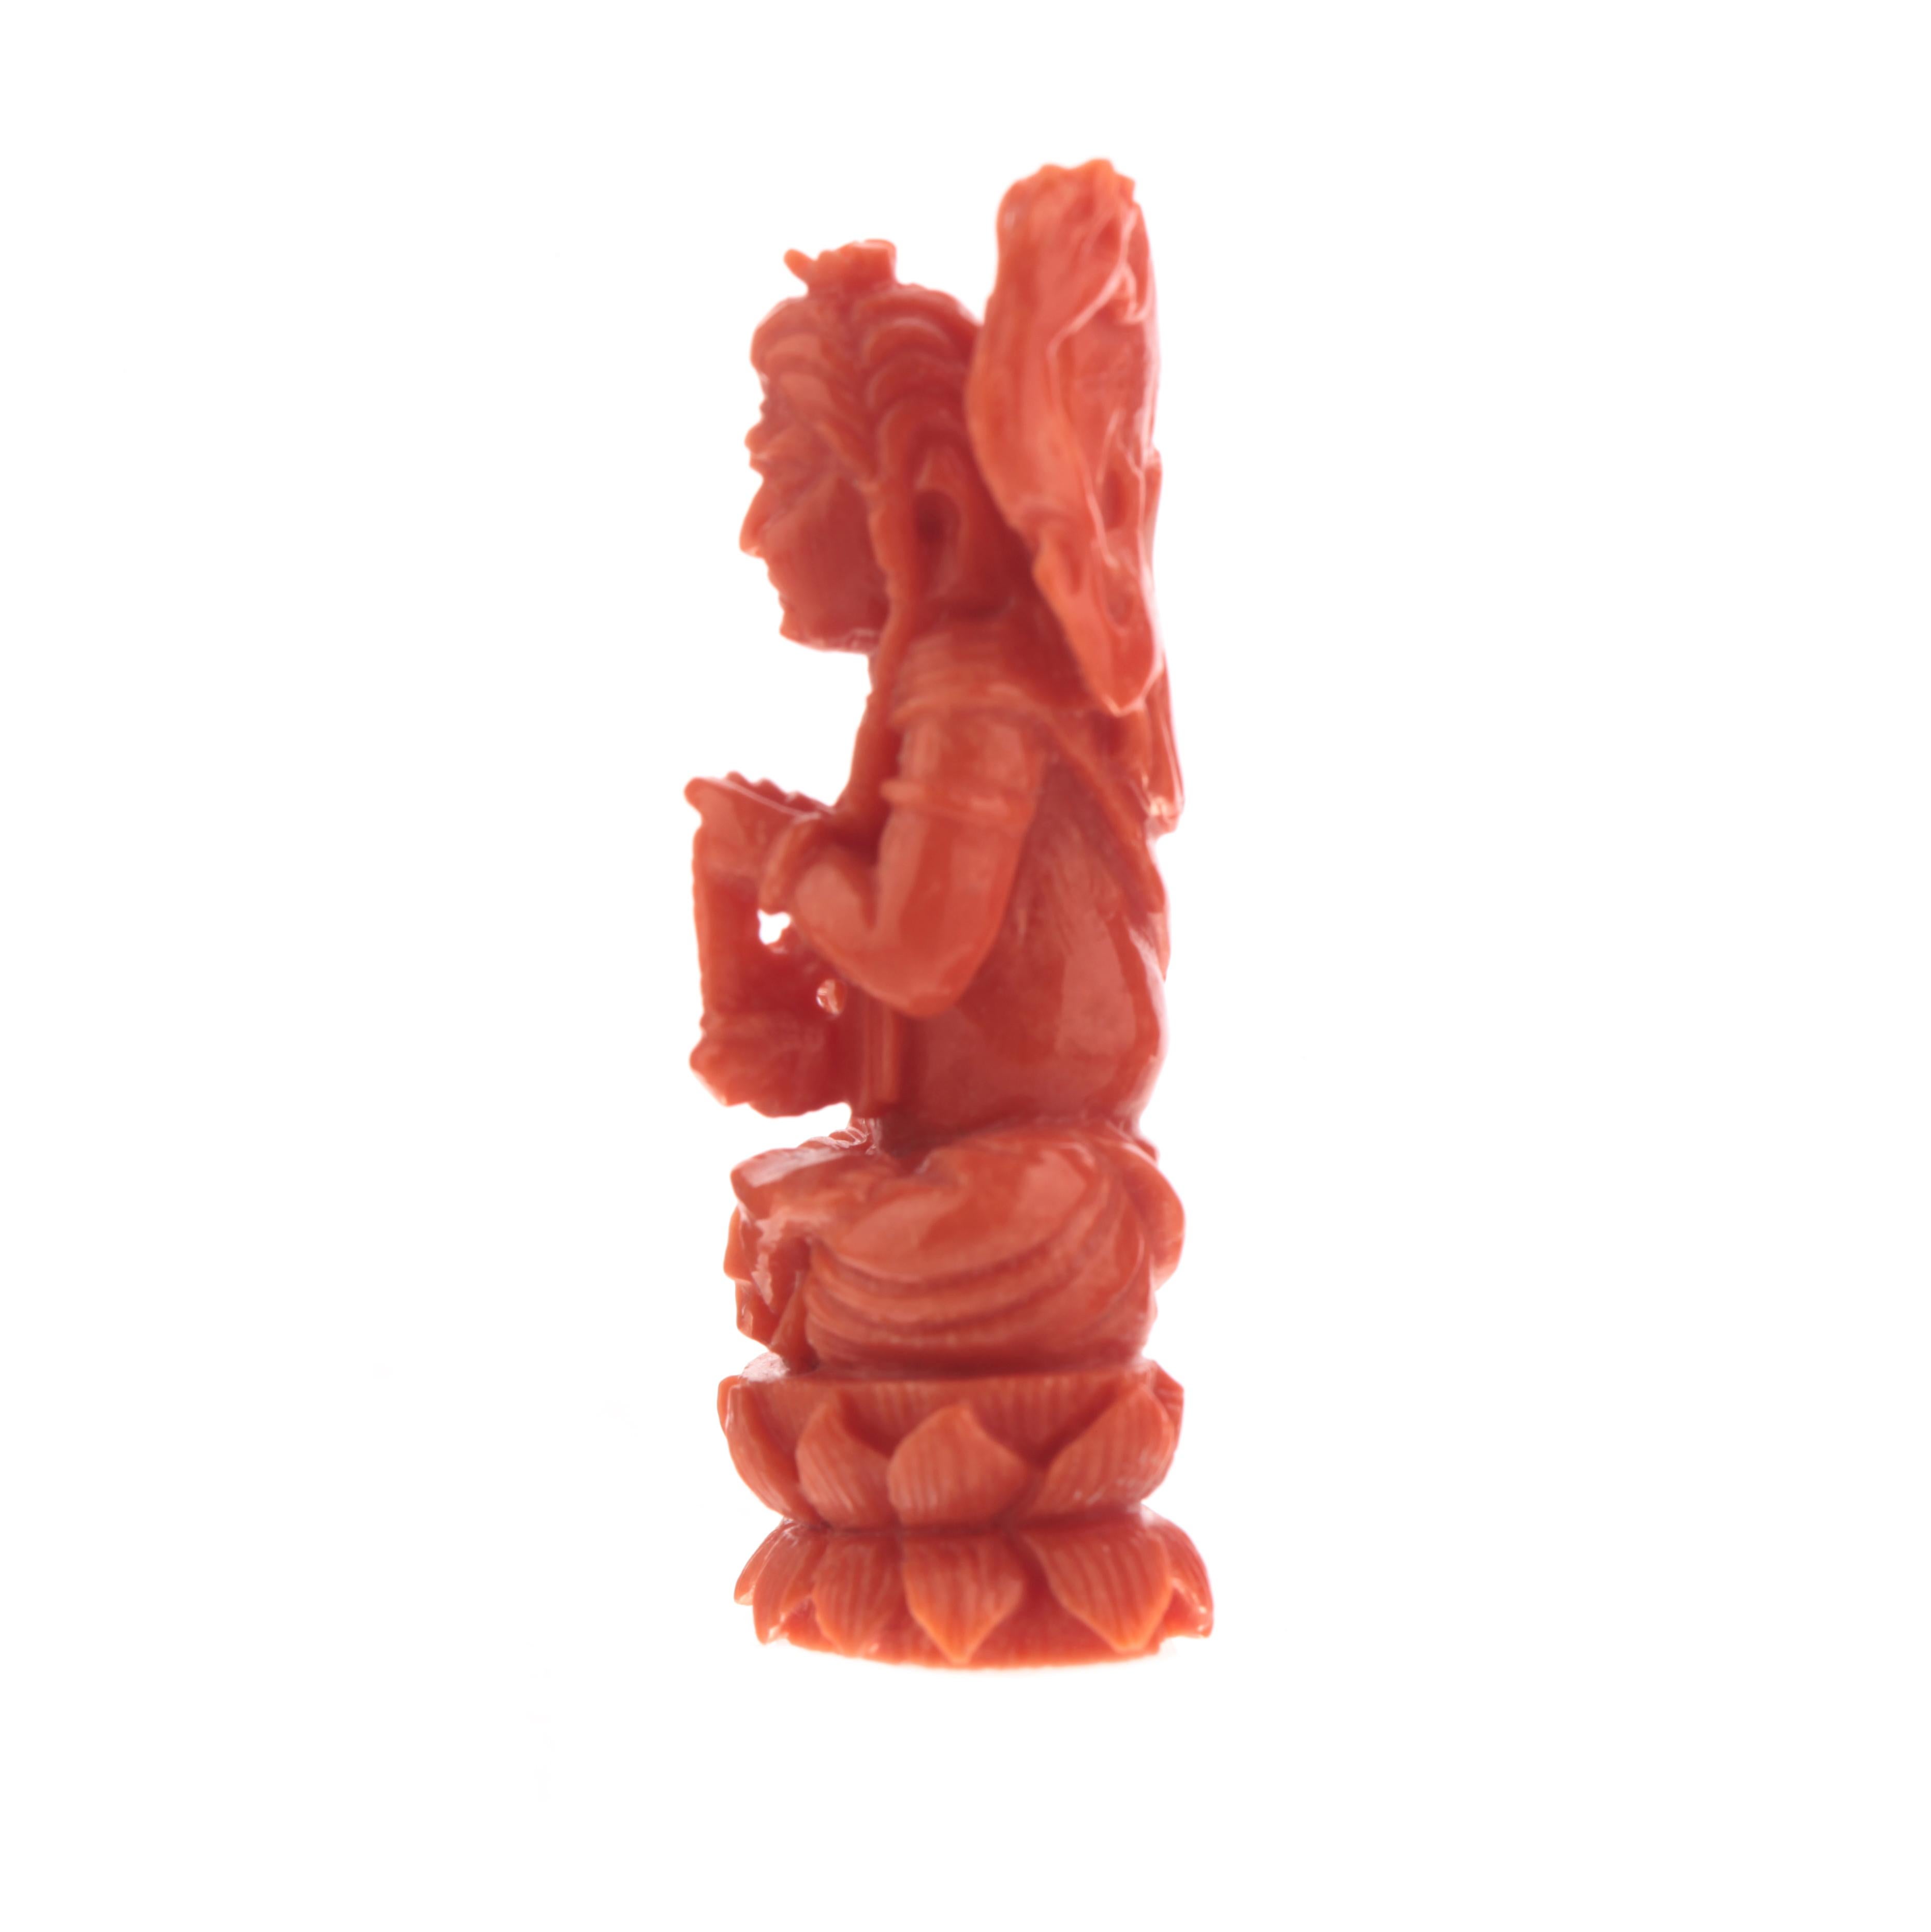 Chinese Export Wise Man Buddhist Carved Asian Decorative Art Statue Sculpture Natural Red Coral For Sale